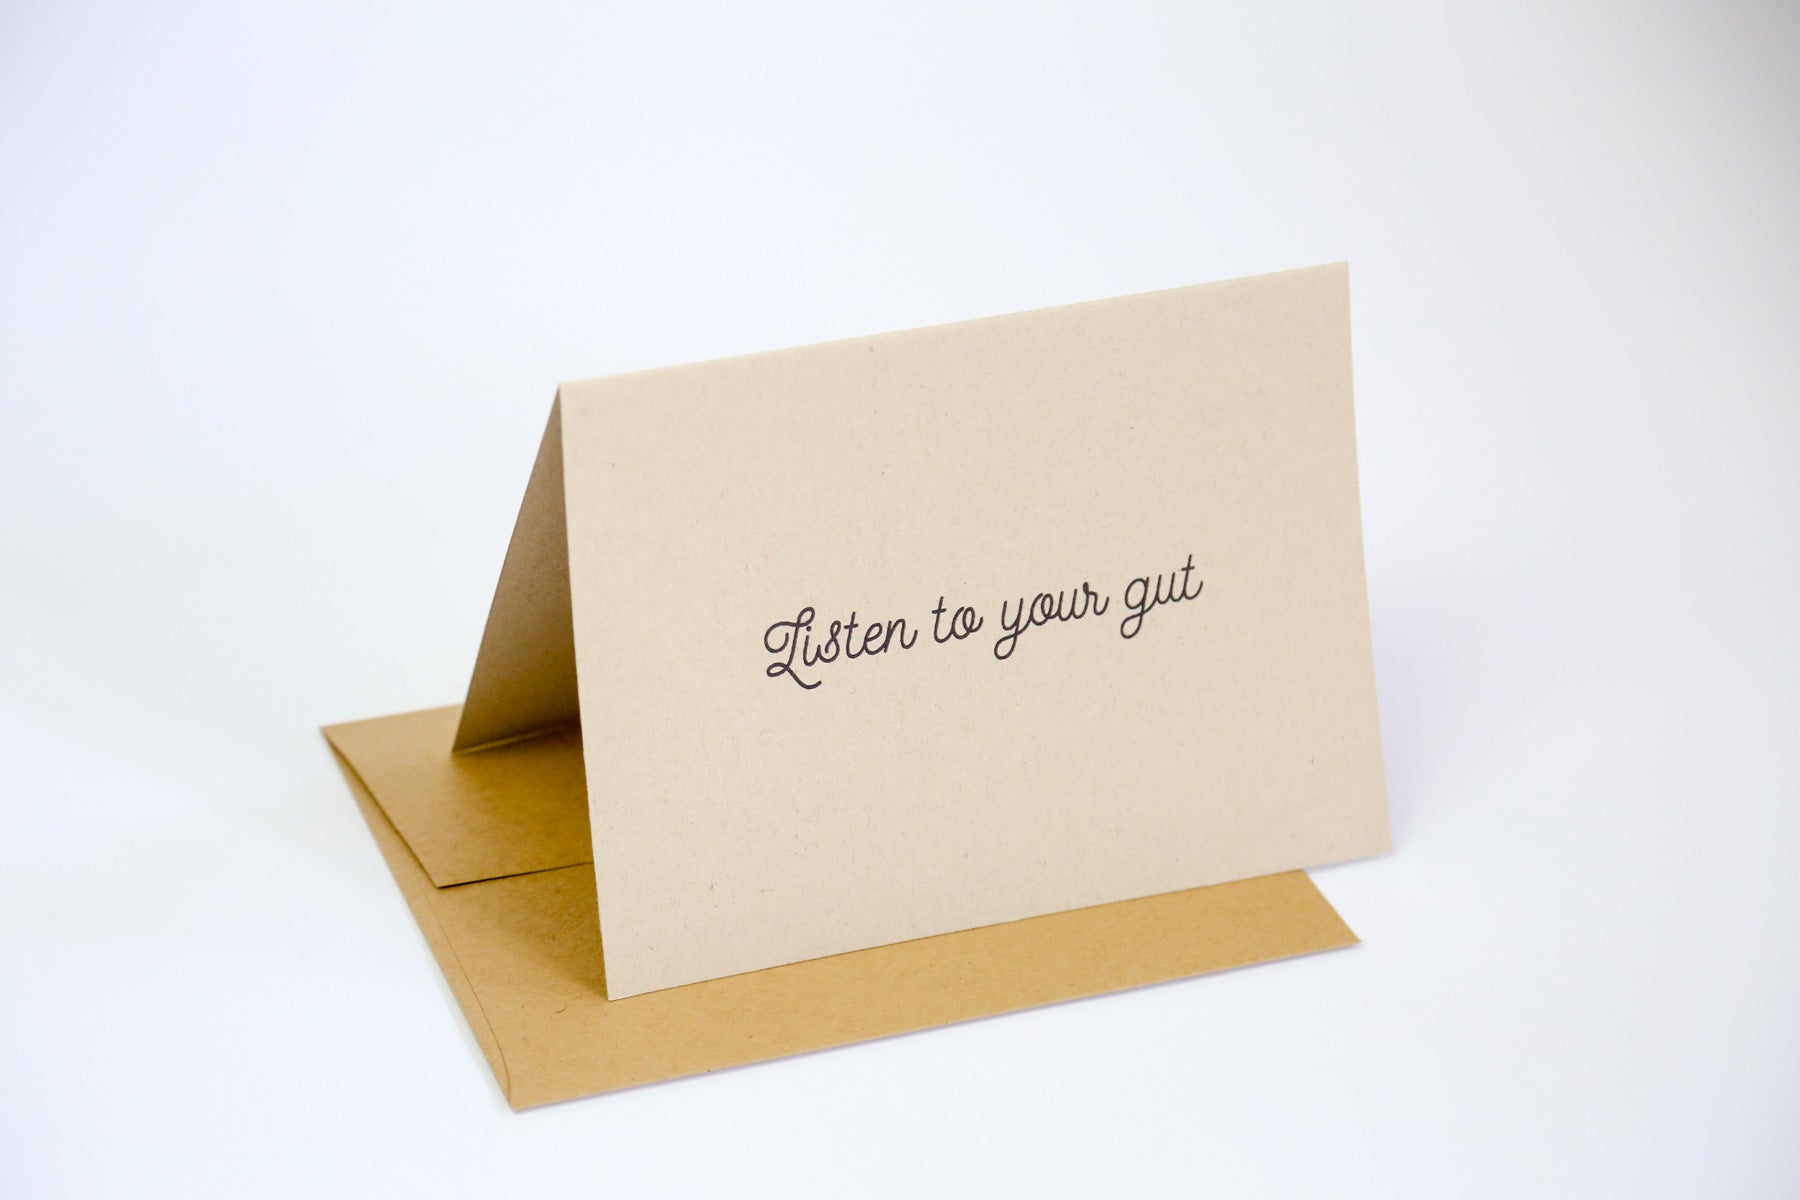 Listen to your gut - Greeting Card